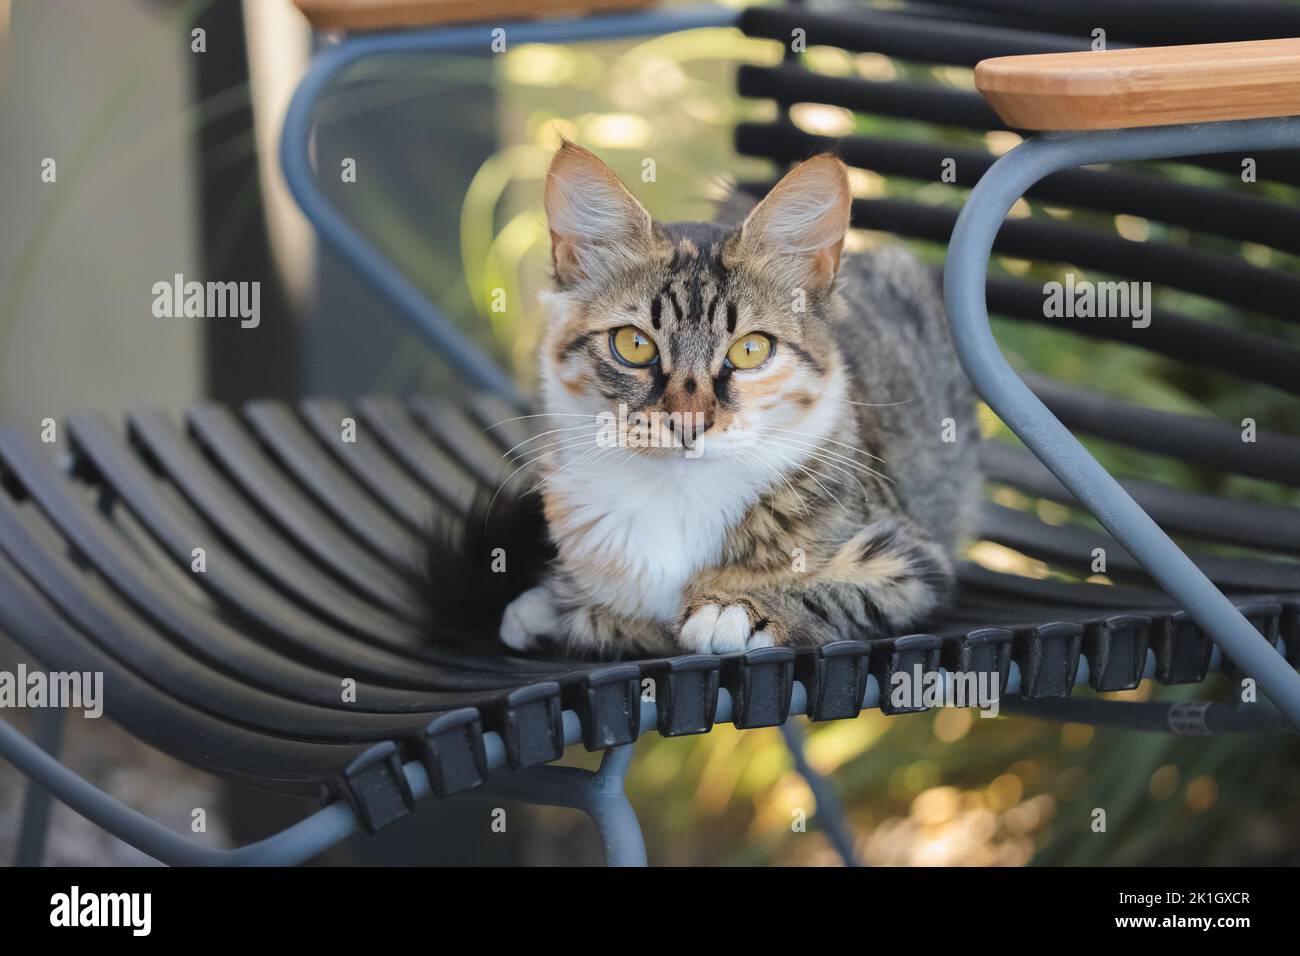 Close-up portrait of a tabby cat  on high alert sitting on a chair in the Greek Island village of Oia, Santorini, Greece. Stock Photo